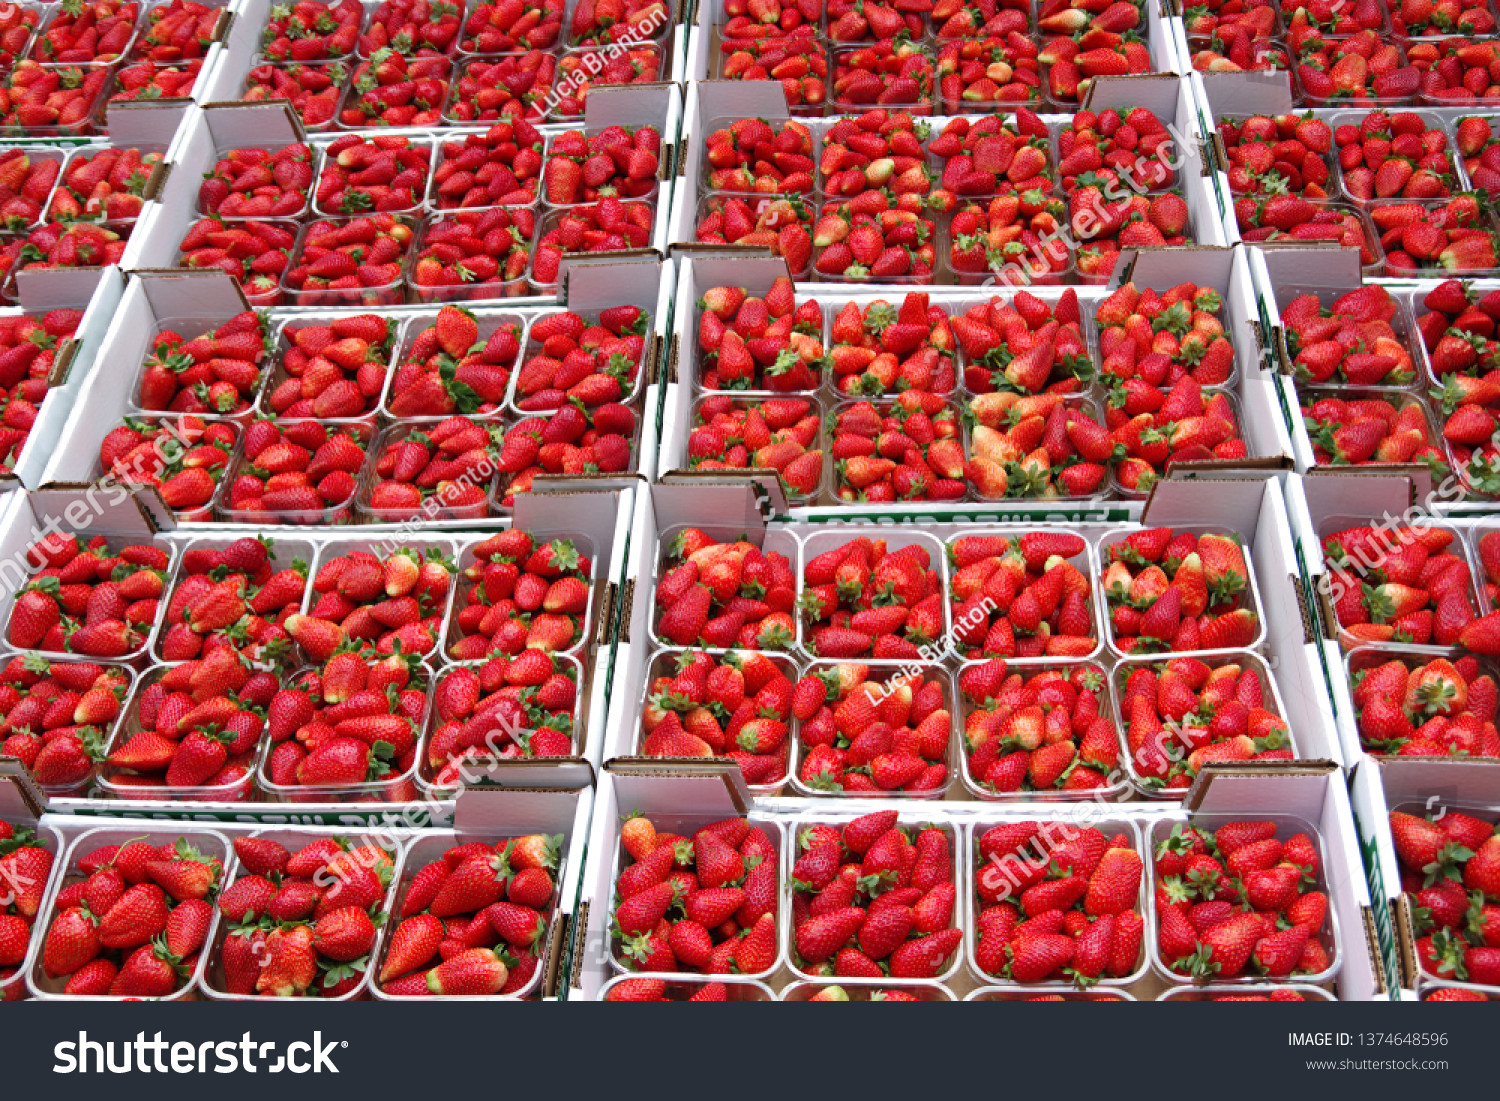 Plenty of strawberries in baskets at the farmers market #1374648596